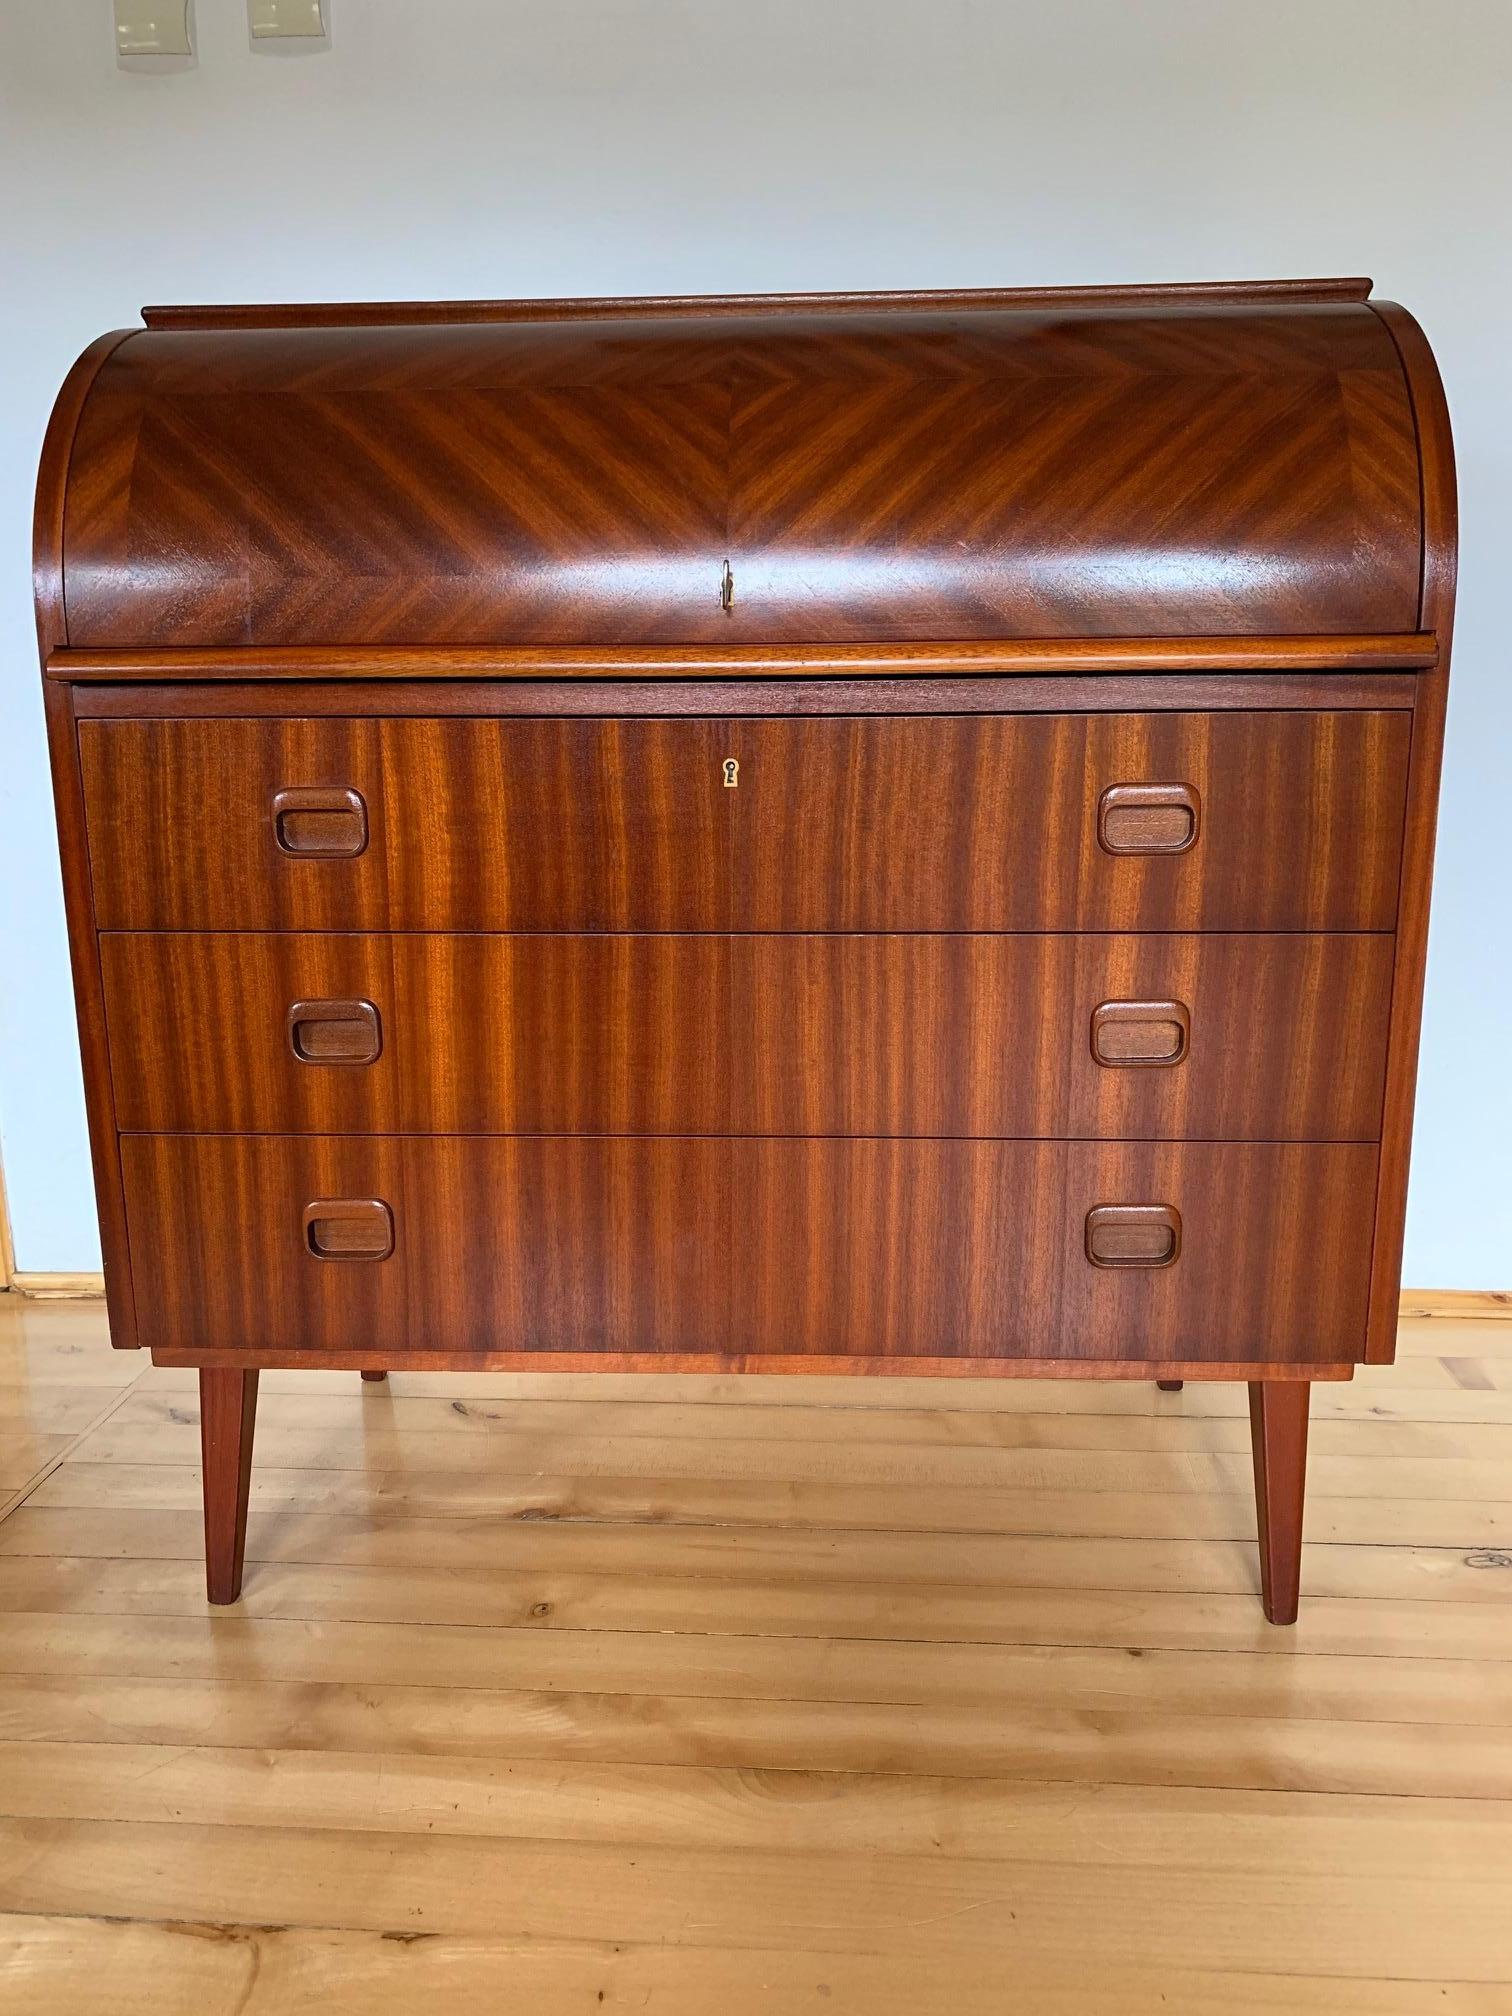 The Swedish secretary, designed by Egon Ostergaard from the 1960s Fully original and signed. The secretariat is in very good condition. Very attractive and functional form.